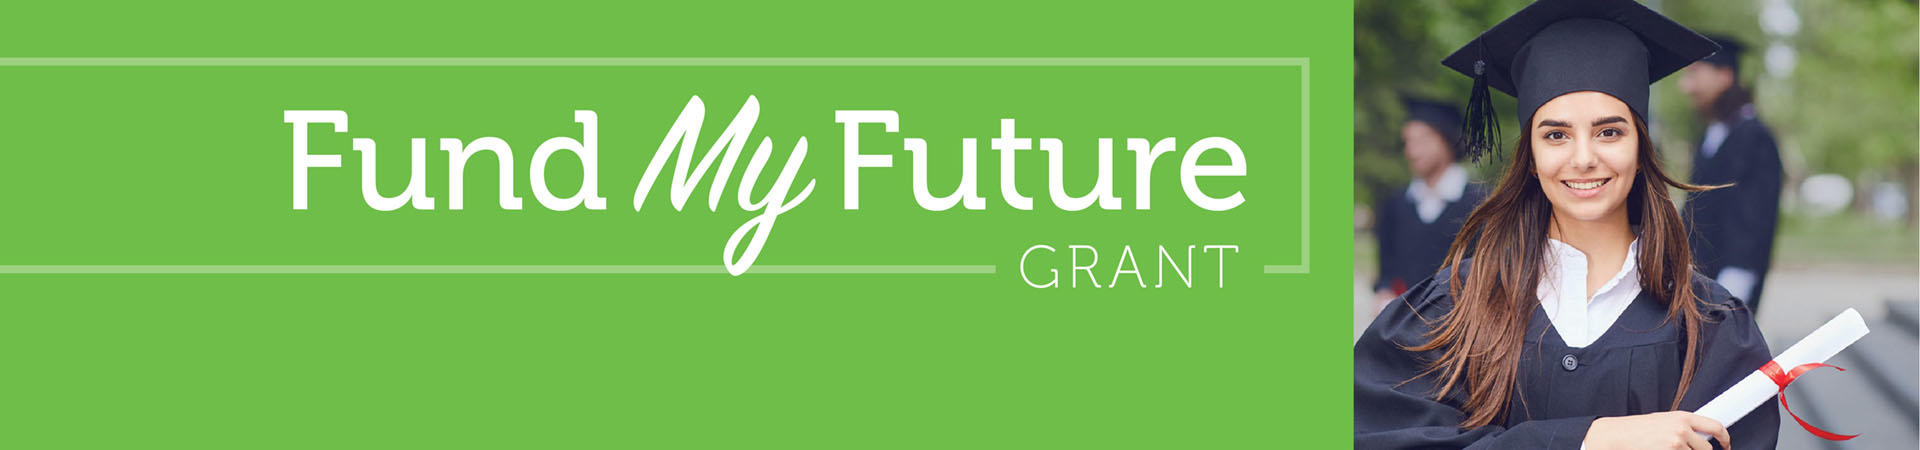 Graphic for Fund My Future